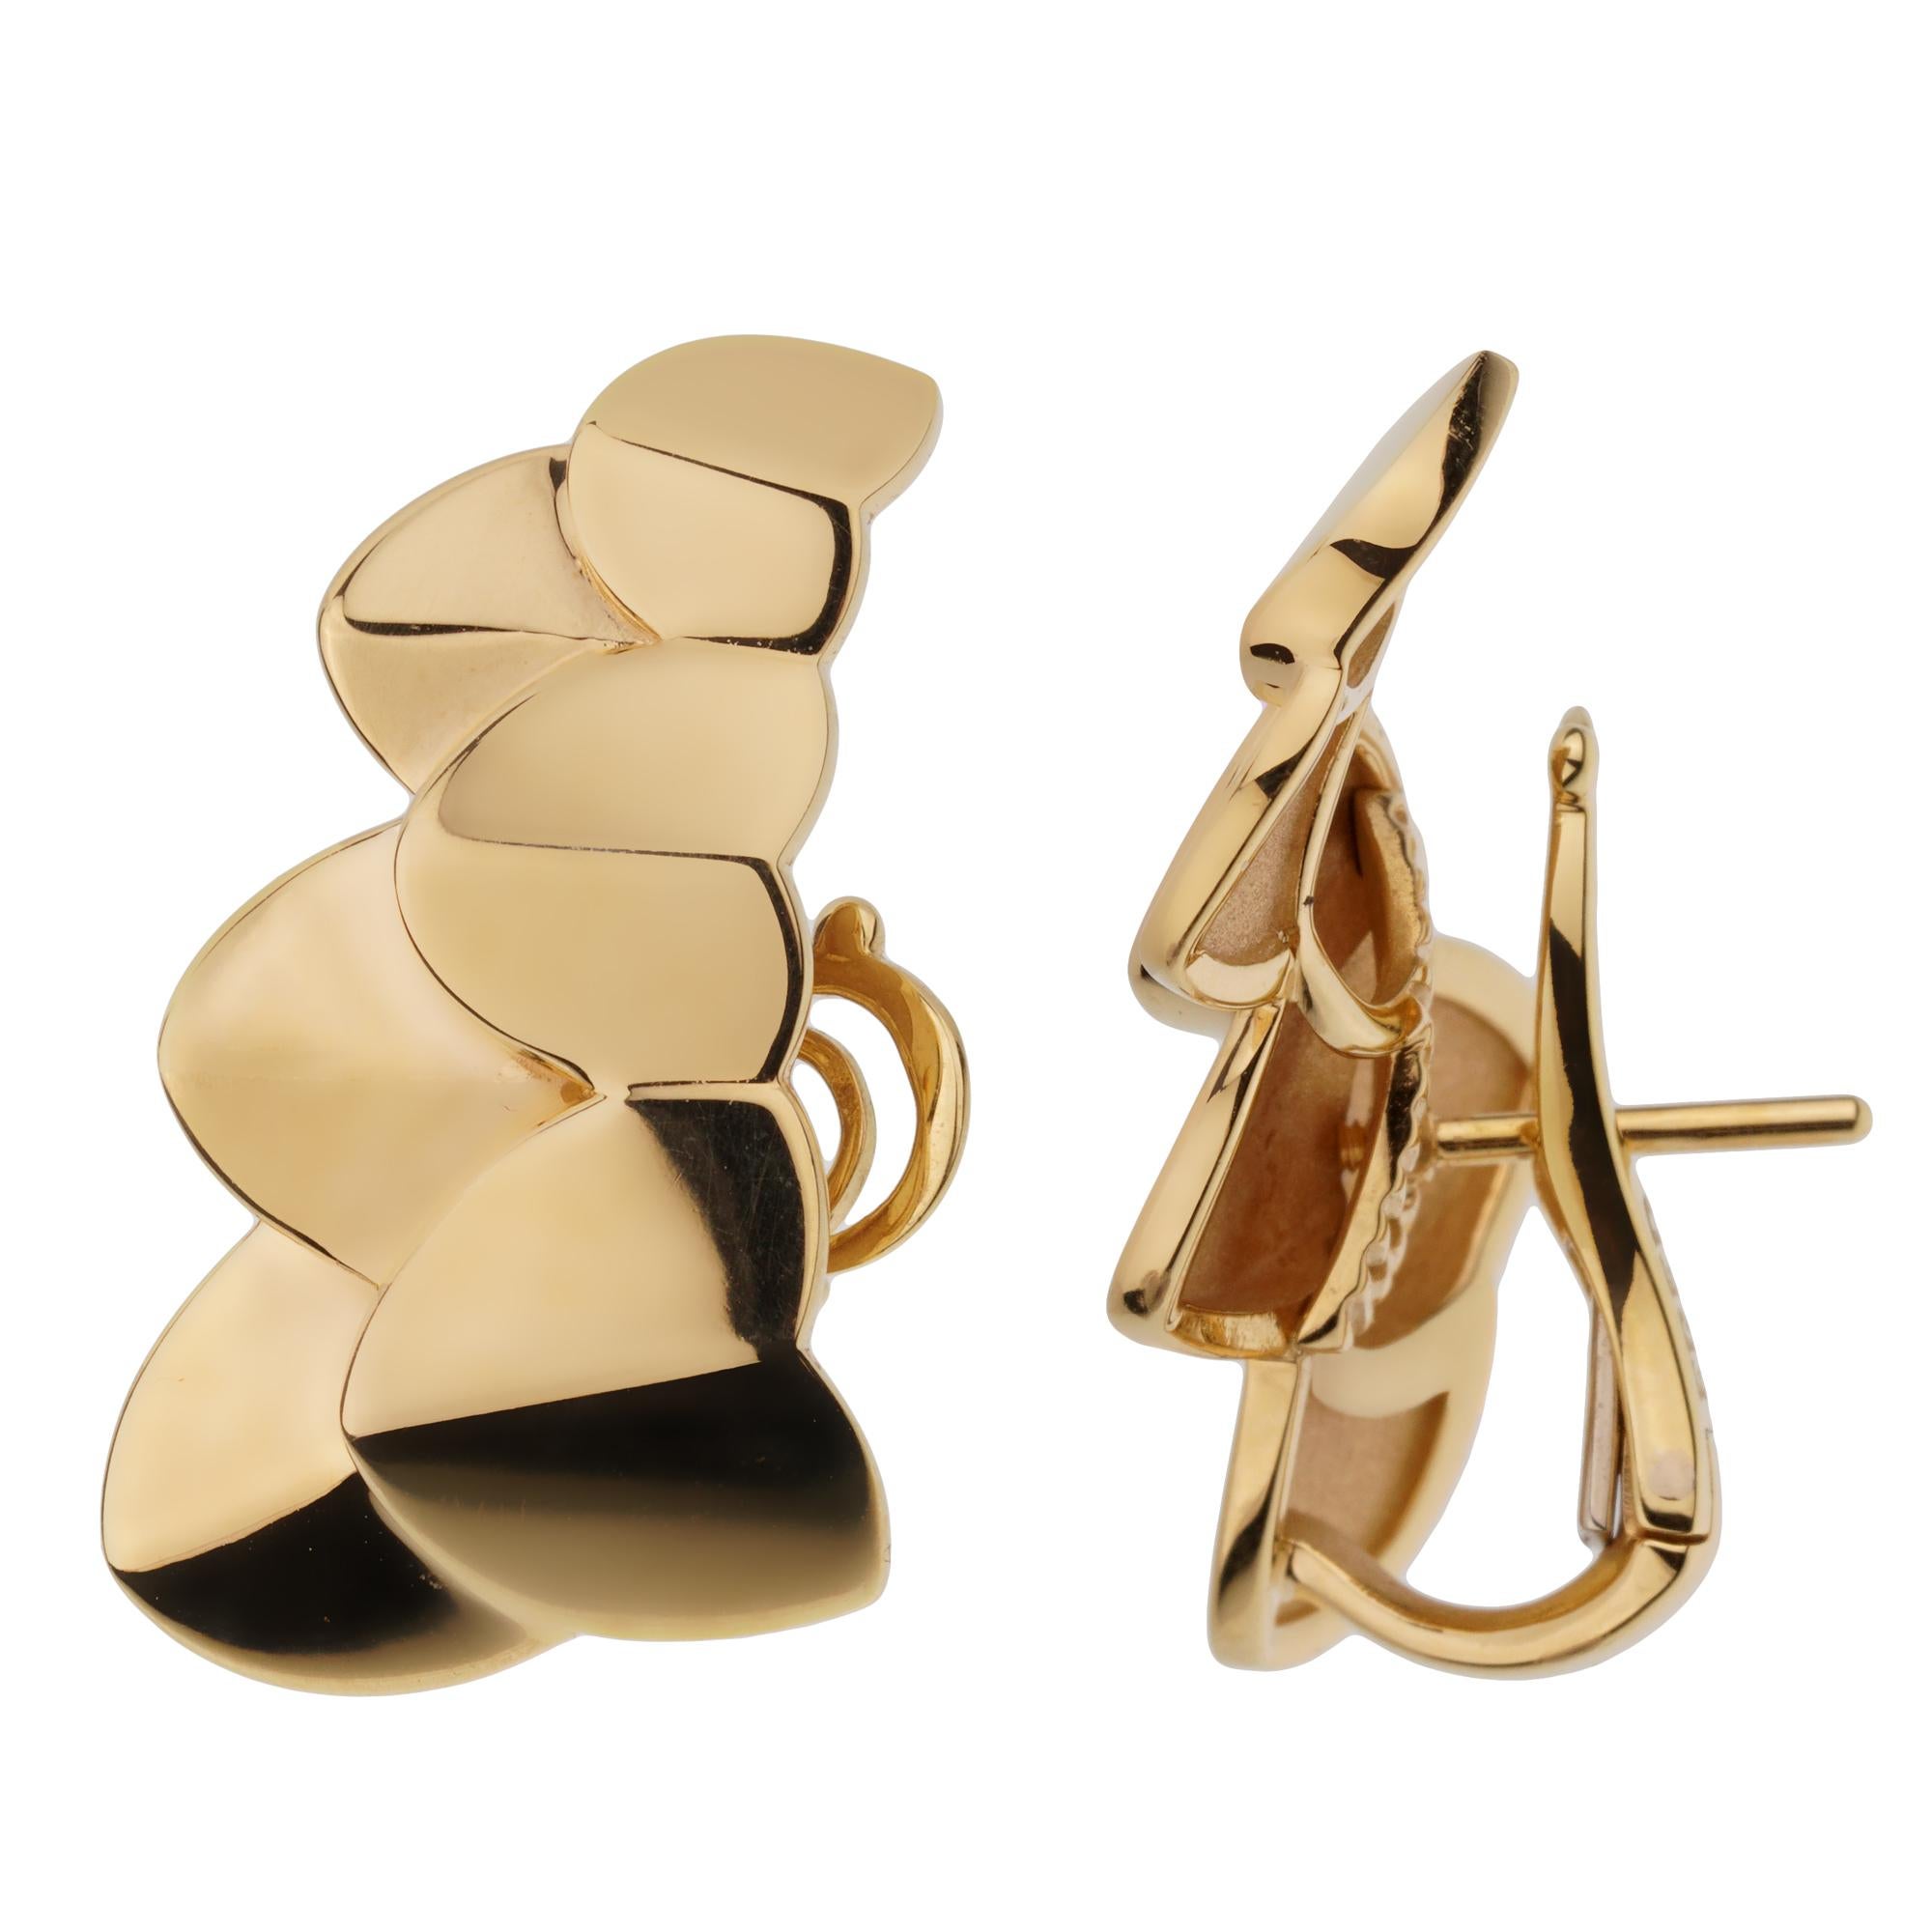 A fabulous brand new pair of Fred of Paris earrings showcasing a double arc motif in shimmering 18k yellow gold. The earrings have a length of 1.10